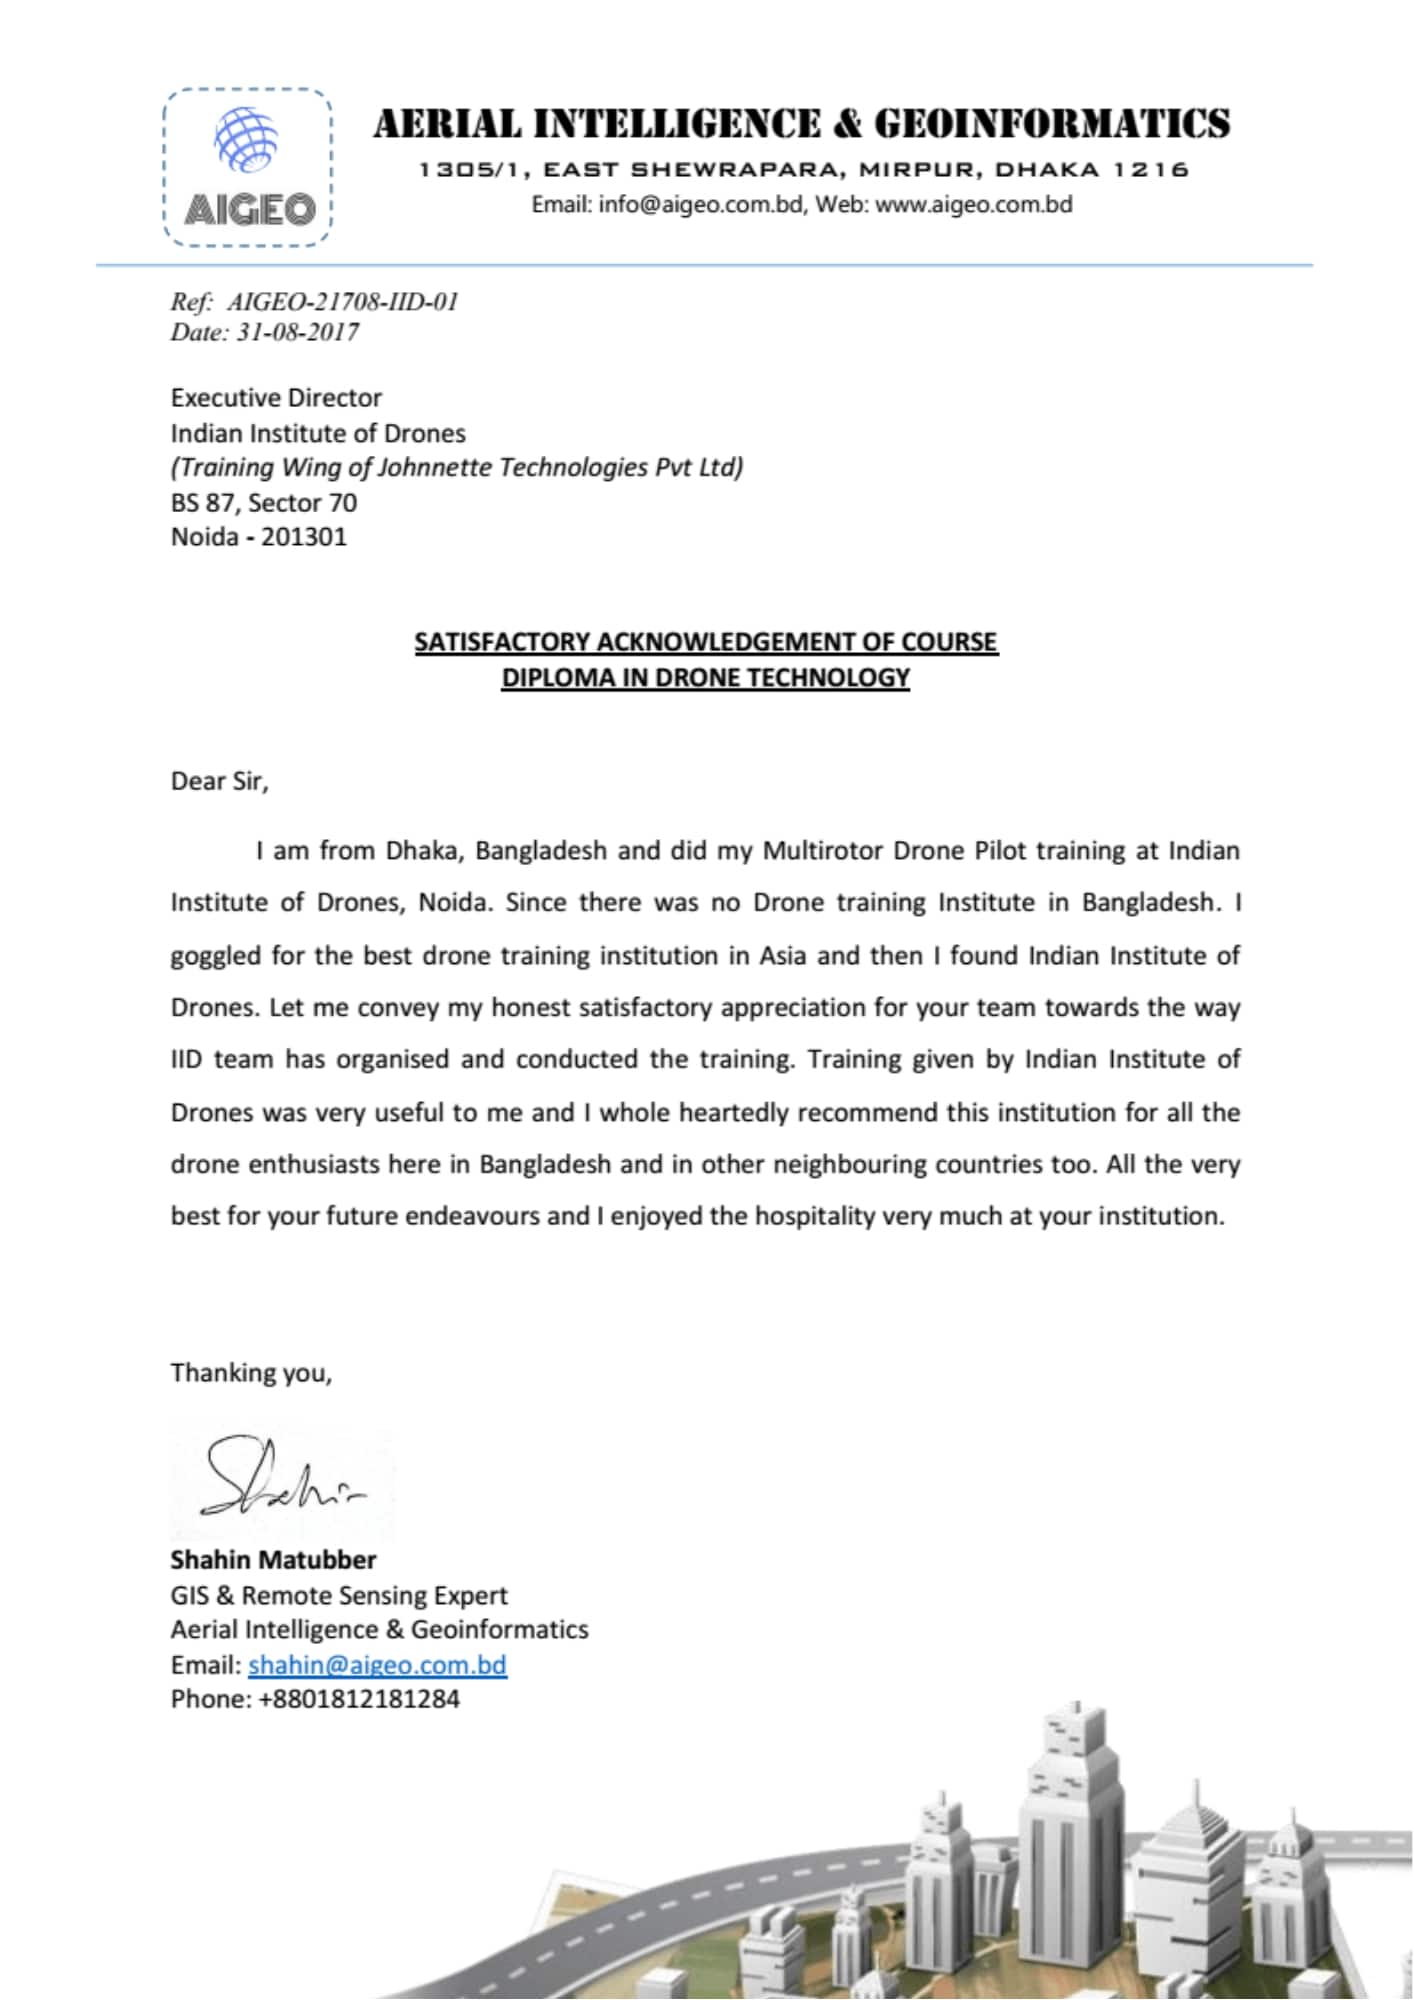 Satisfactory Letter from AIGEO Bangladesh